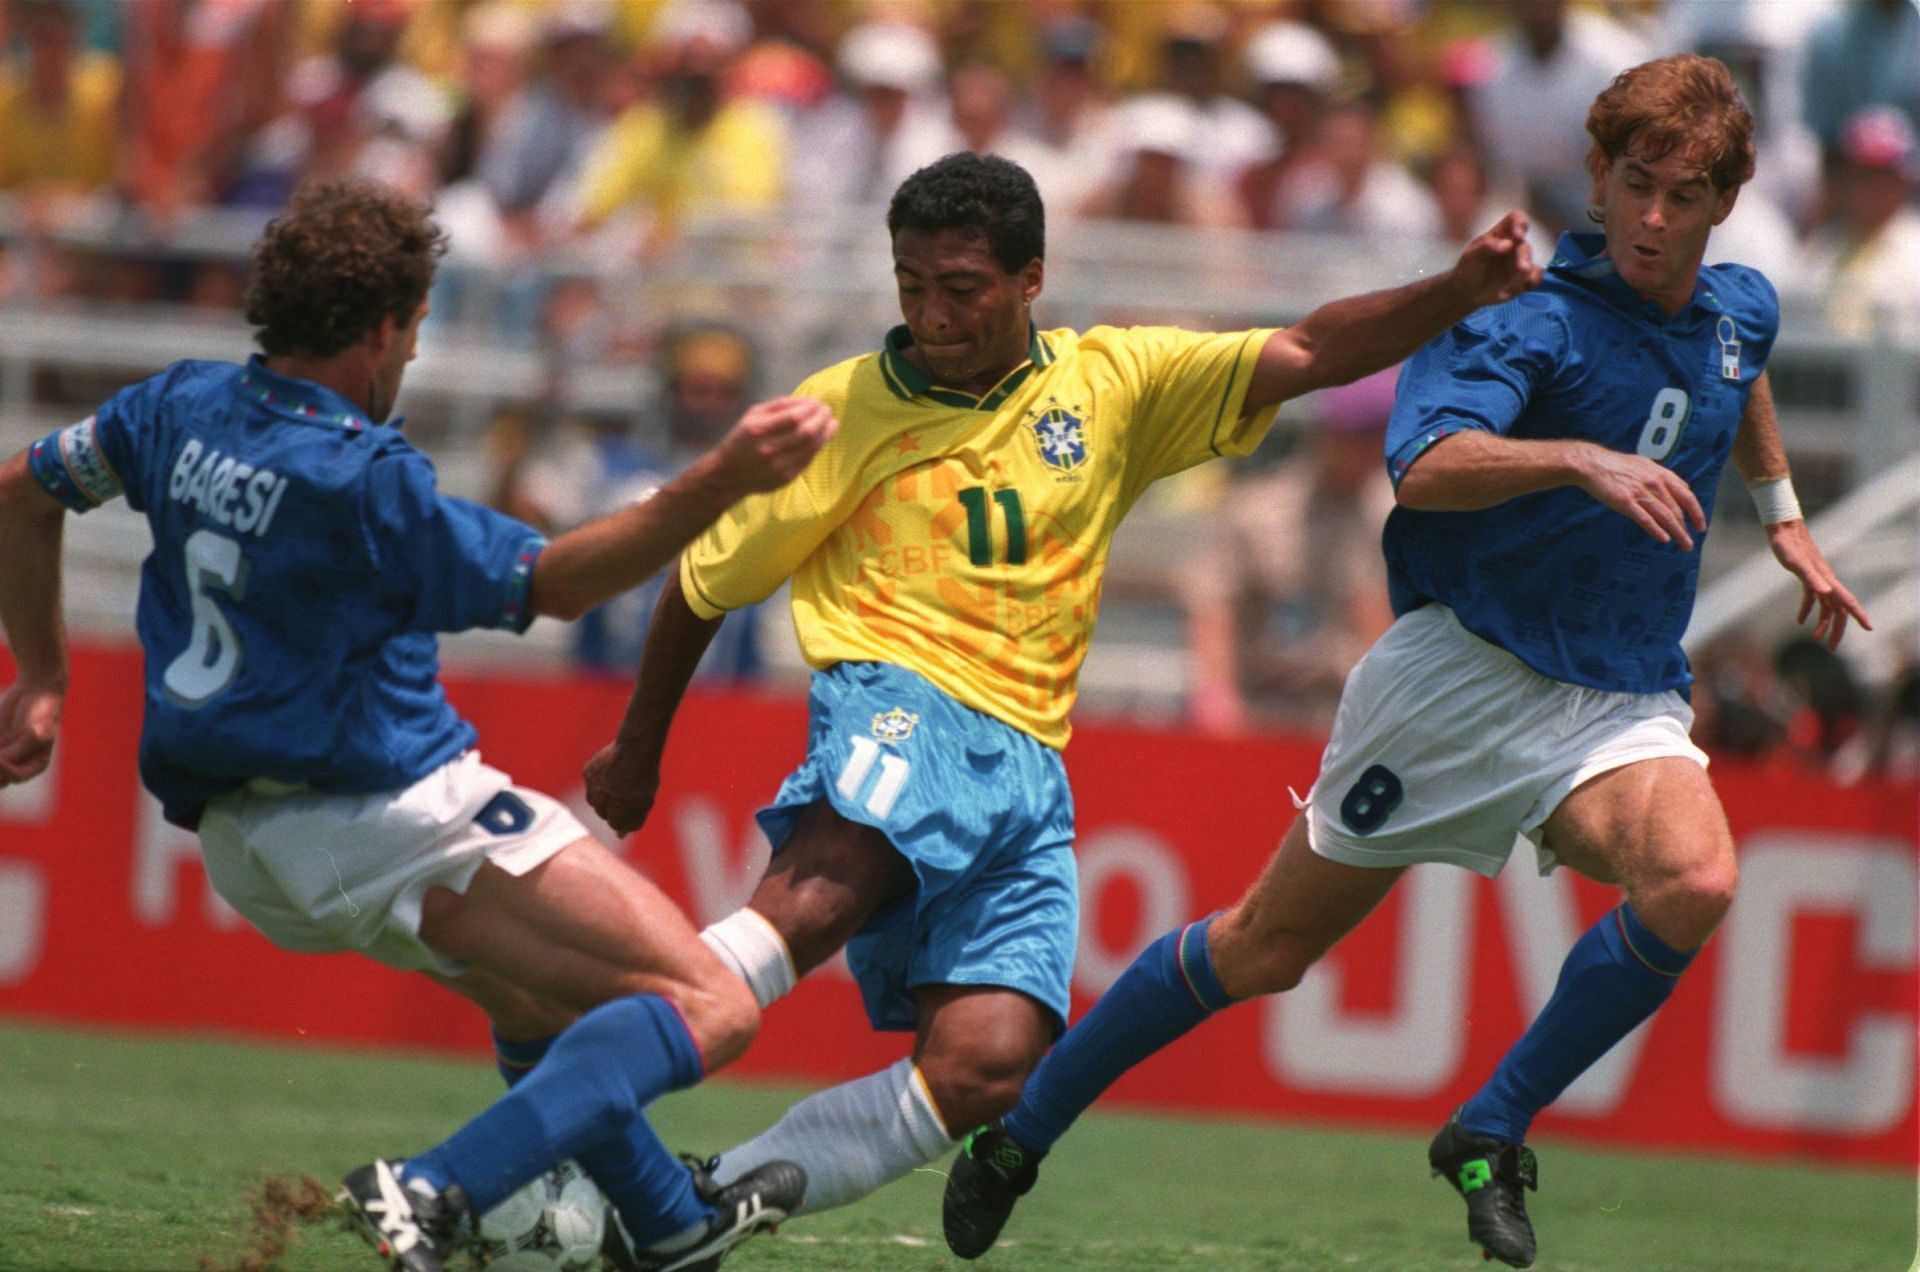 Romario in action for Brazil in the 1994 World Cup final